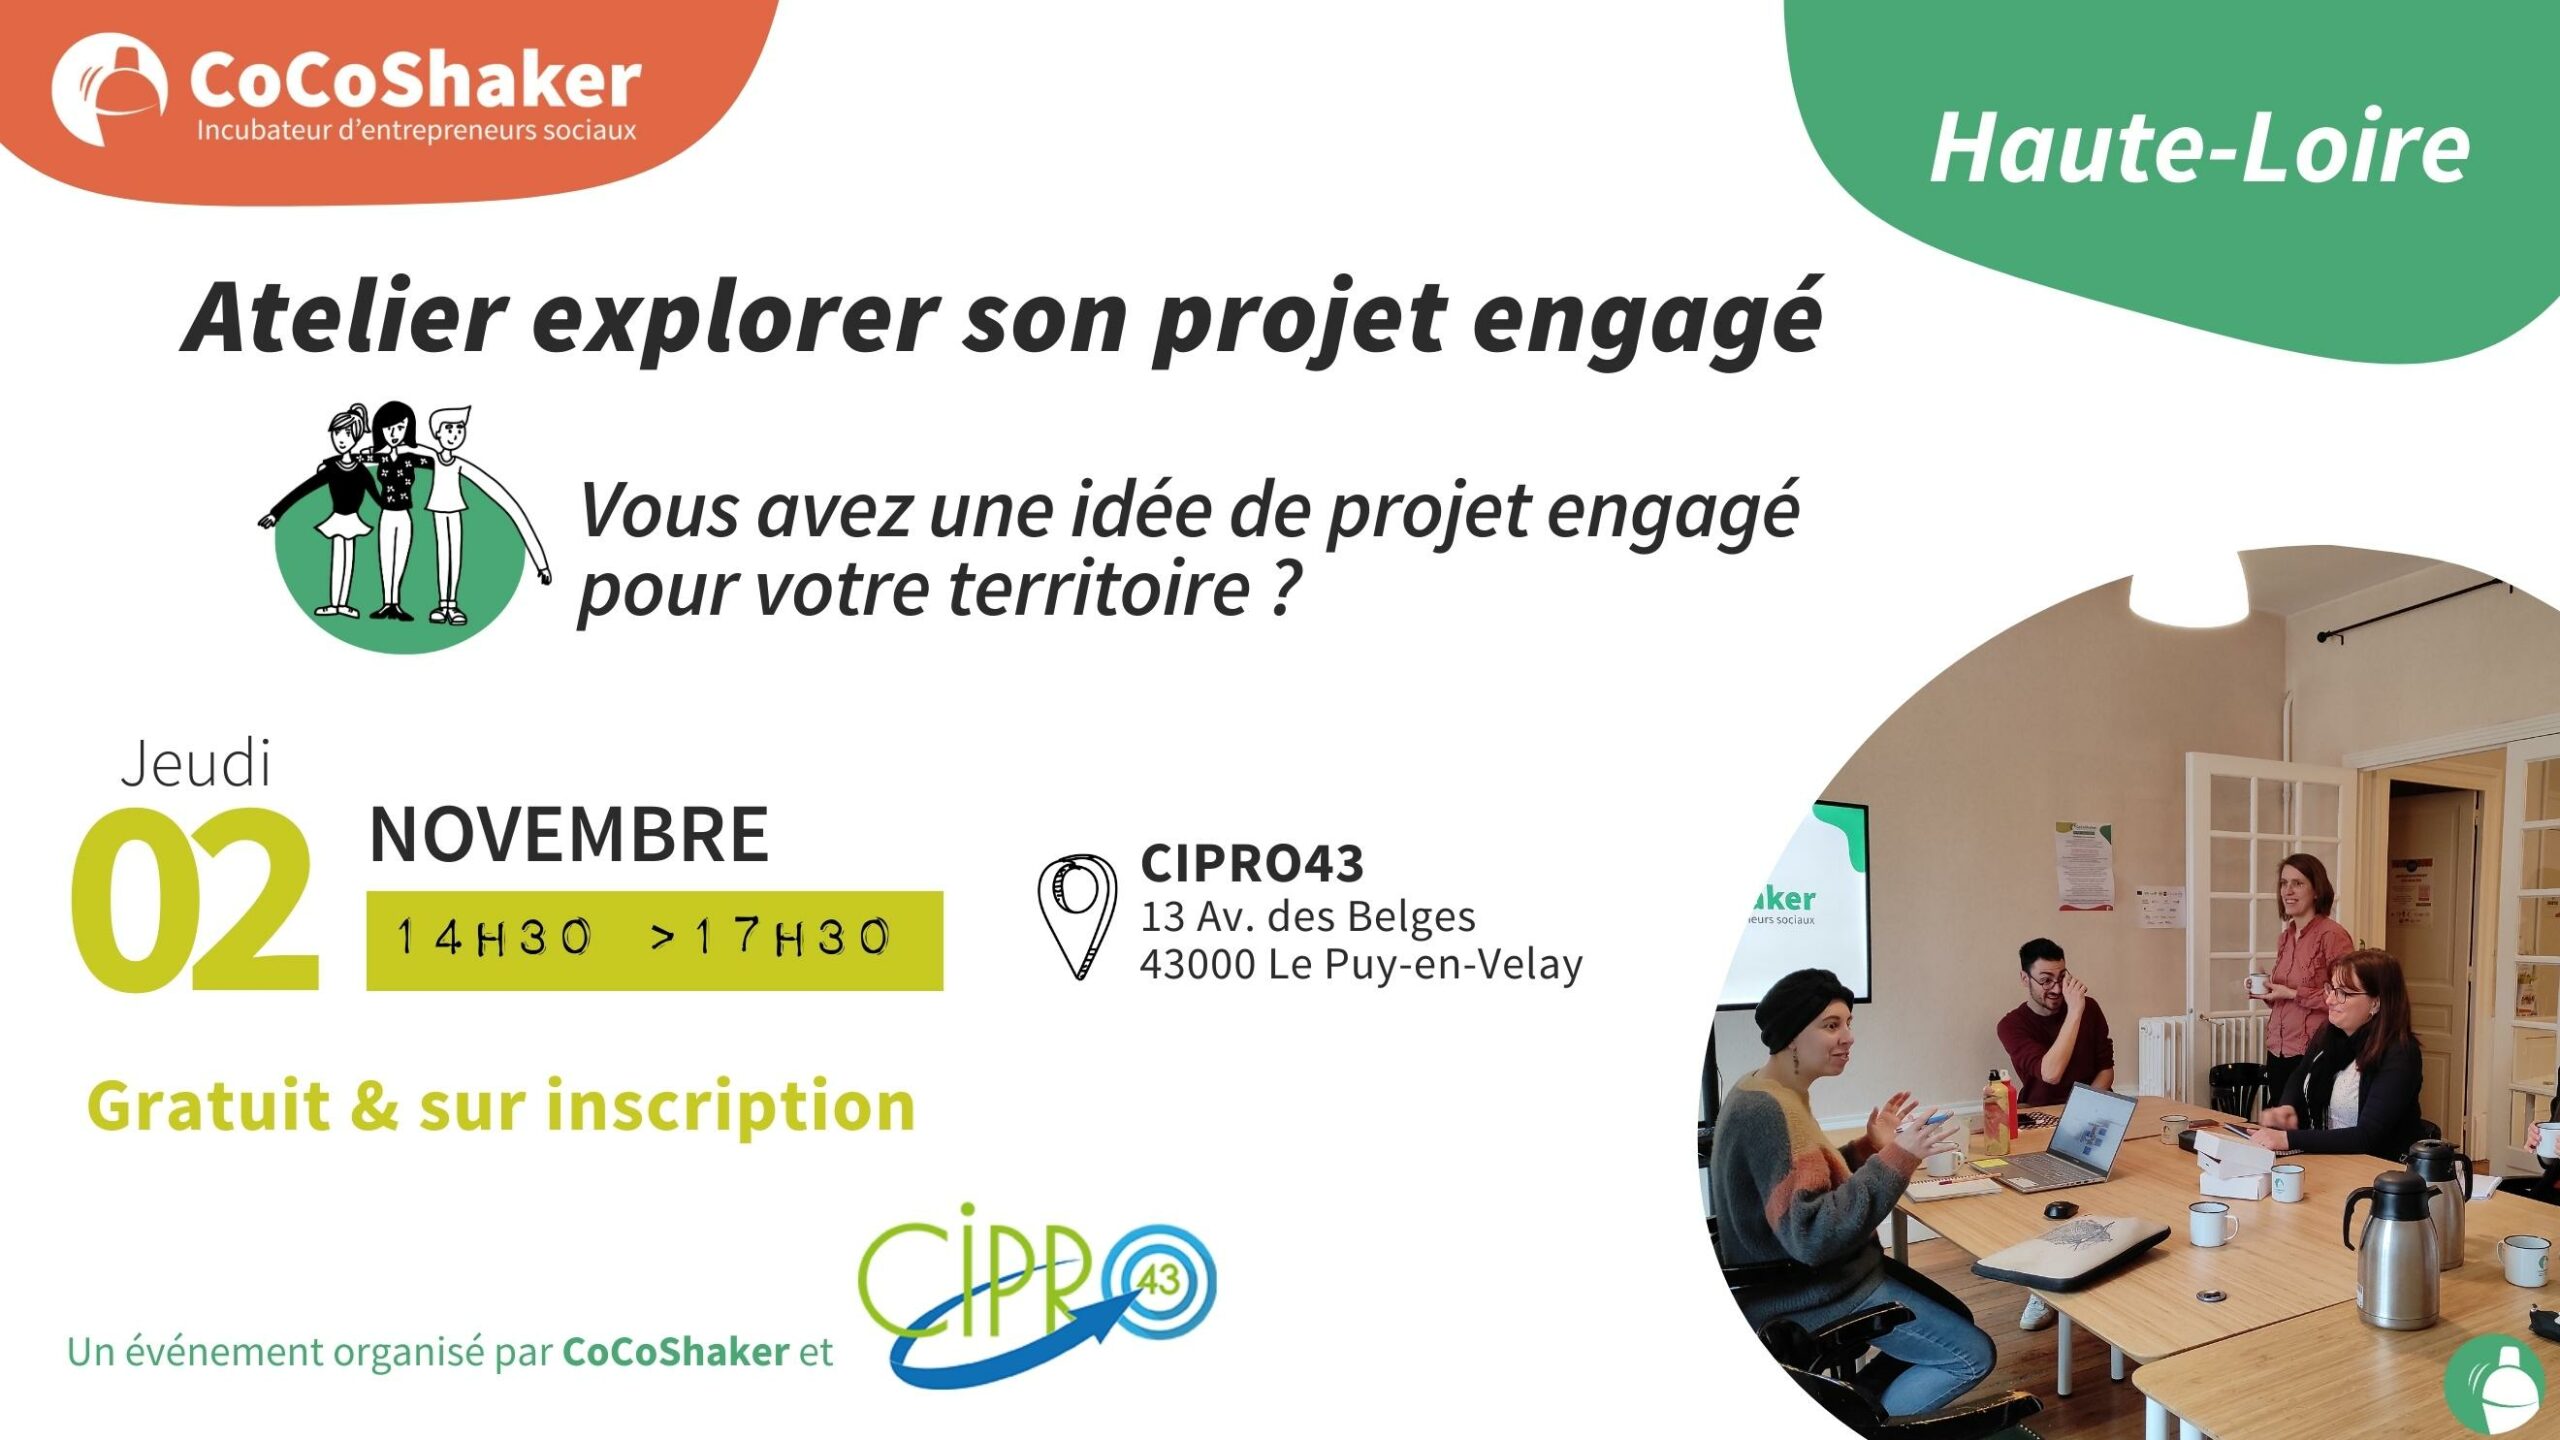 You are currently viewing Atelier explorer son projet engagé